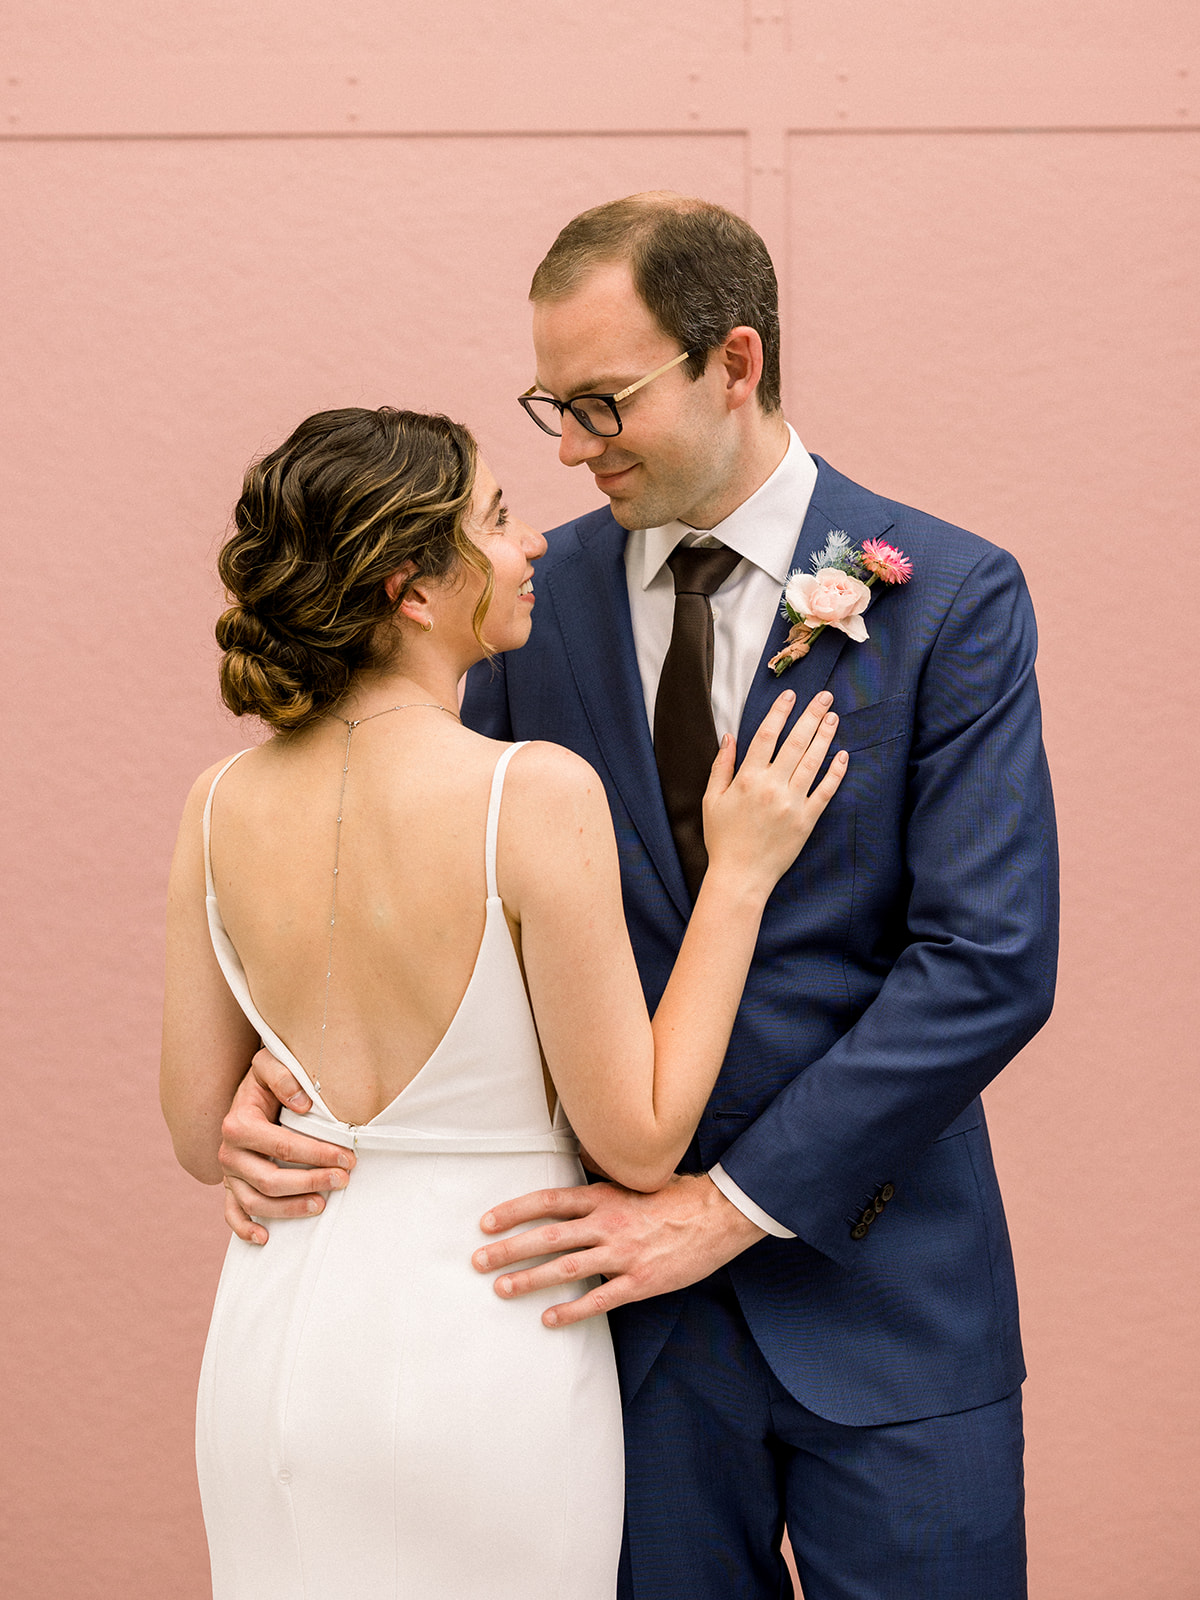 bride in contemporary wedding dress with necklace down the back poses with groom in navy suit